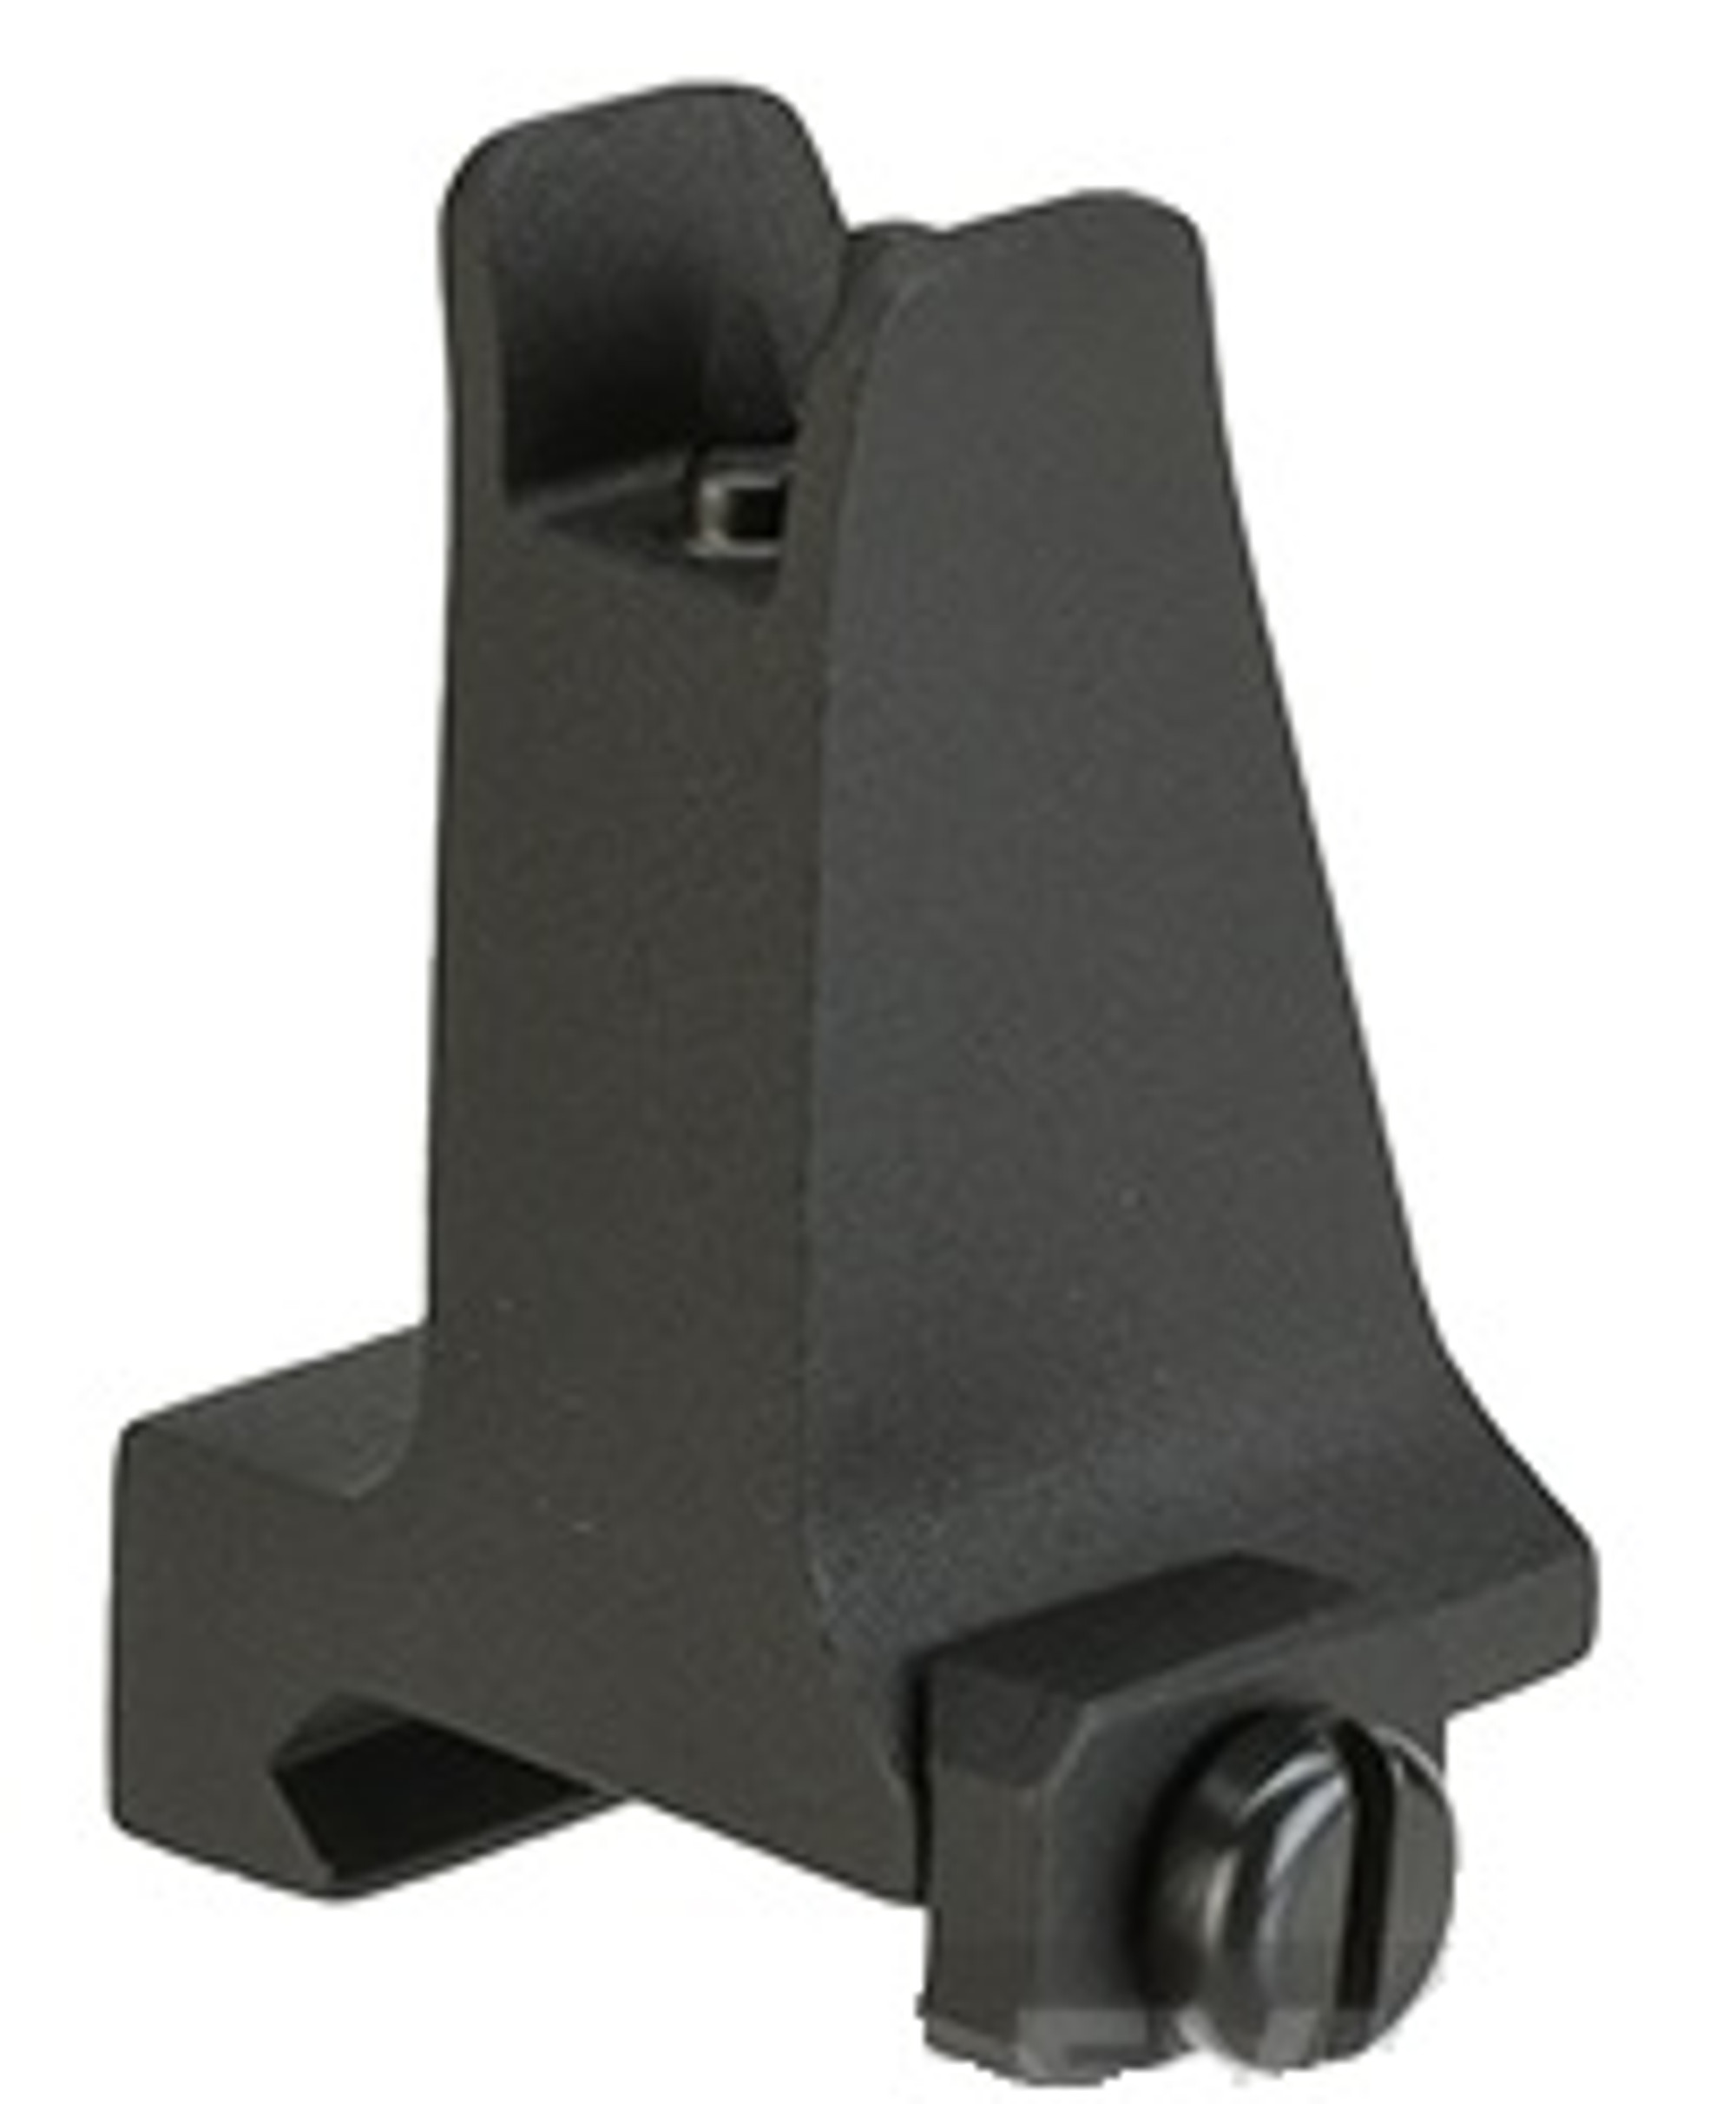 Krytac Full Metal Front Sight for Airsoft AEG Rifles